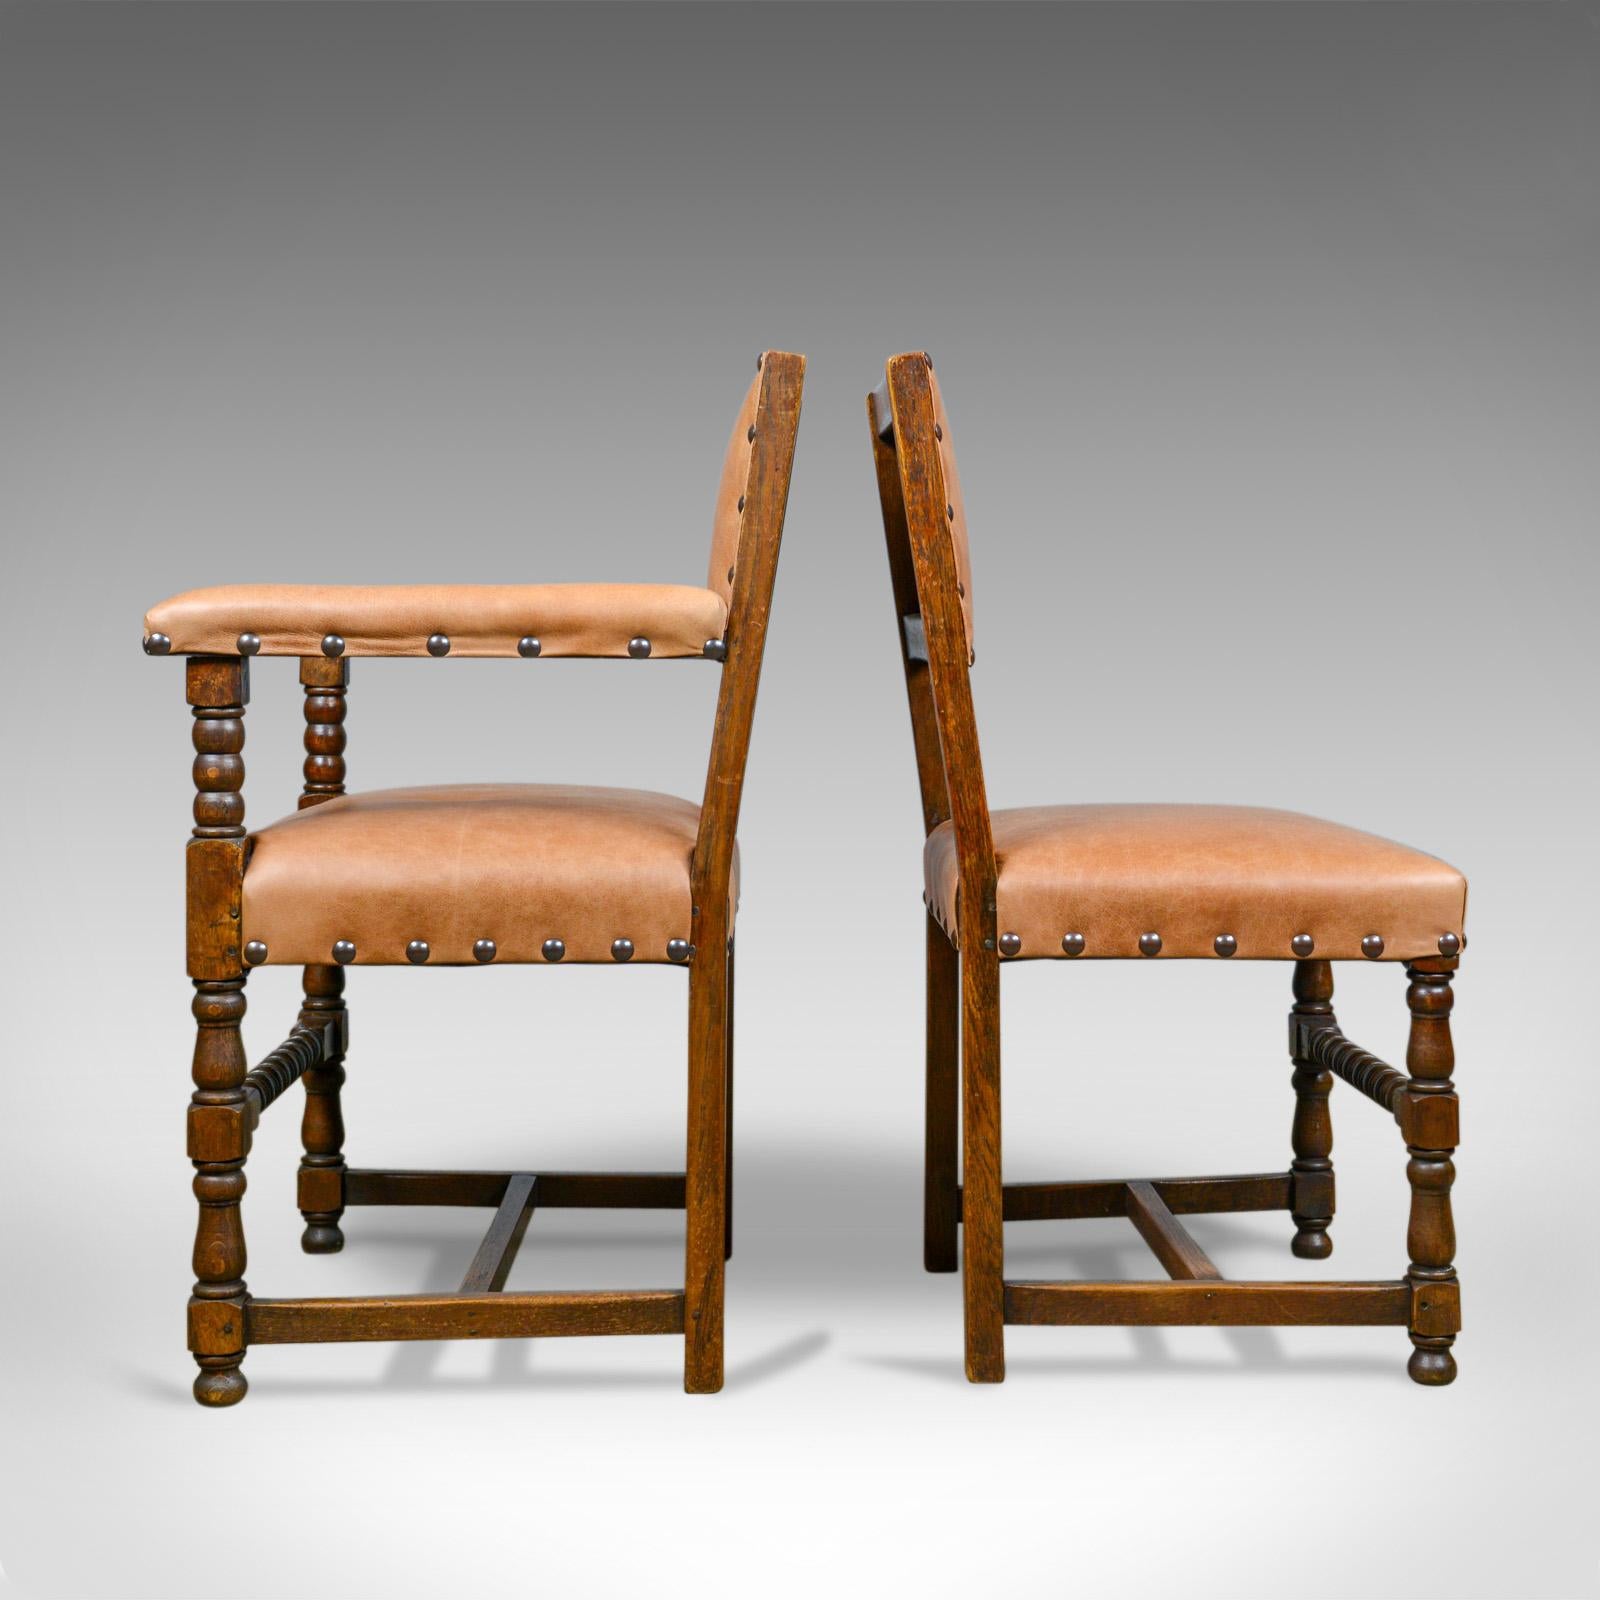 English Set of Six Antique Dining Chairs, Edwardian, 17th Century Revival, Oak